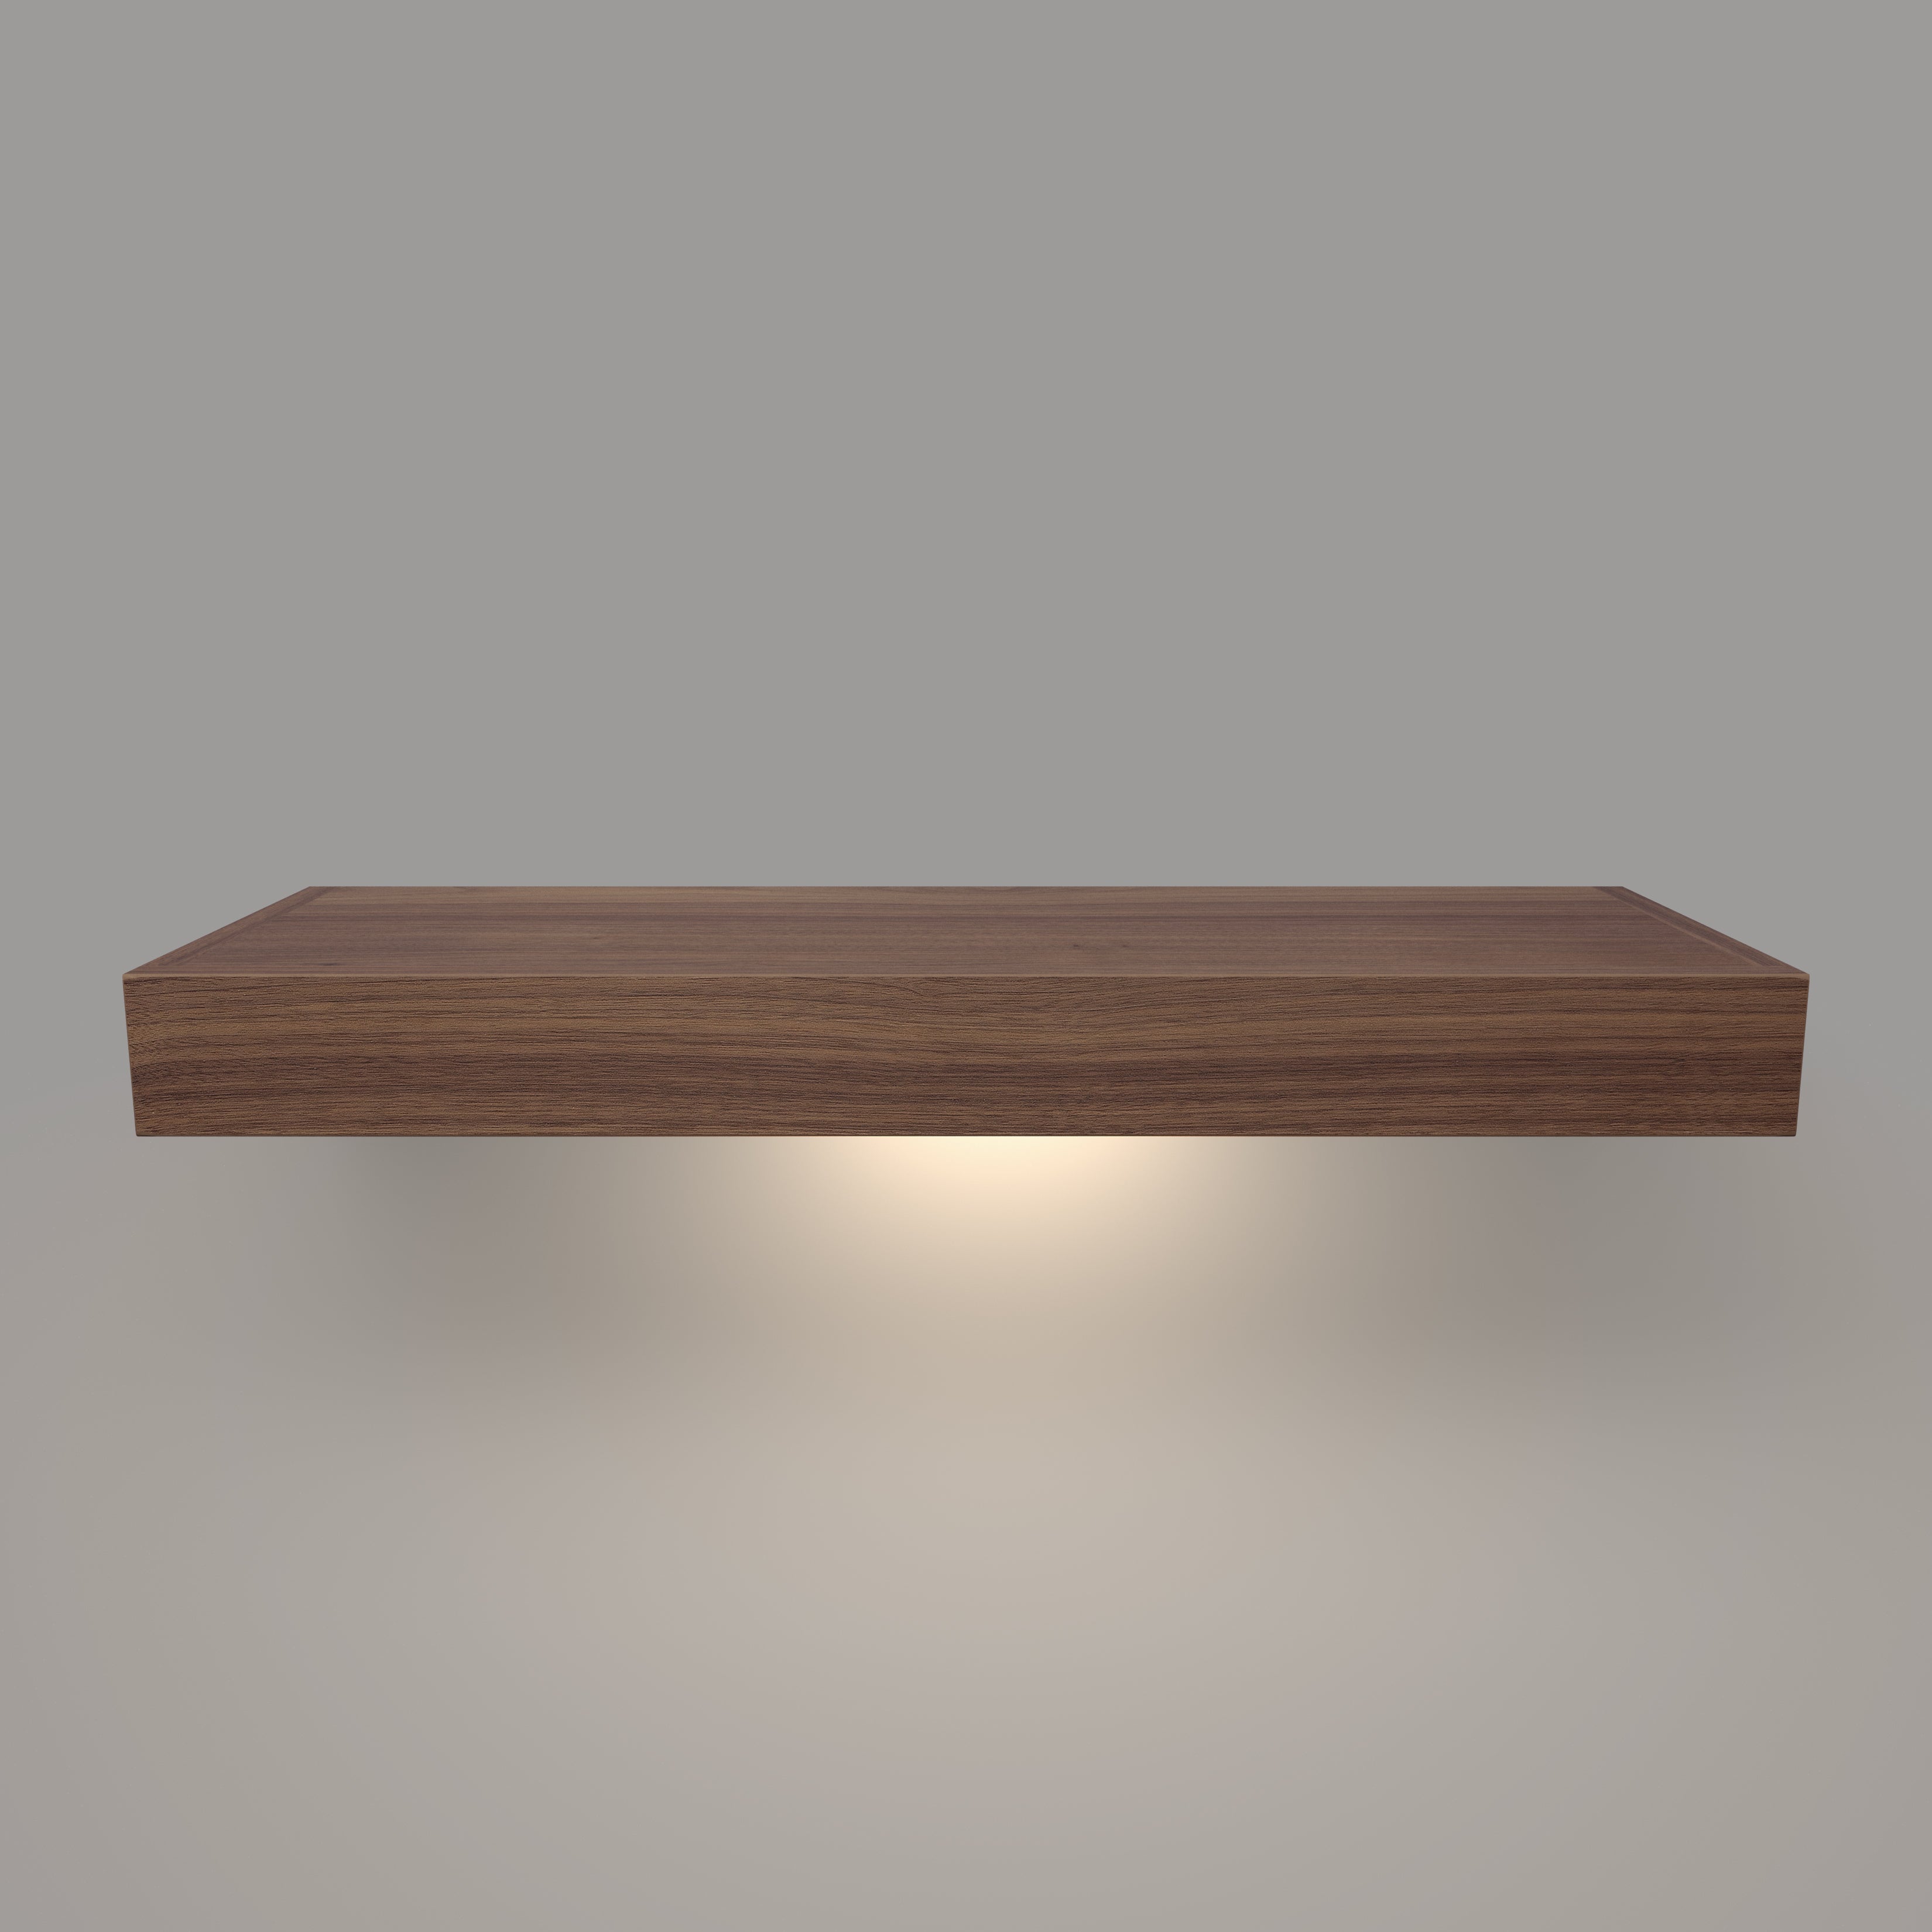 Walnut 3 Inch Thick LED Lighted Floating Shelf - Battery